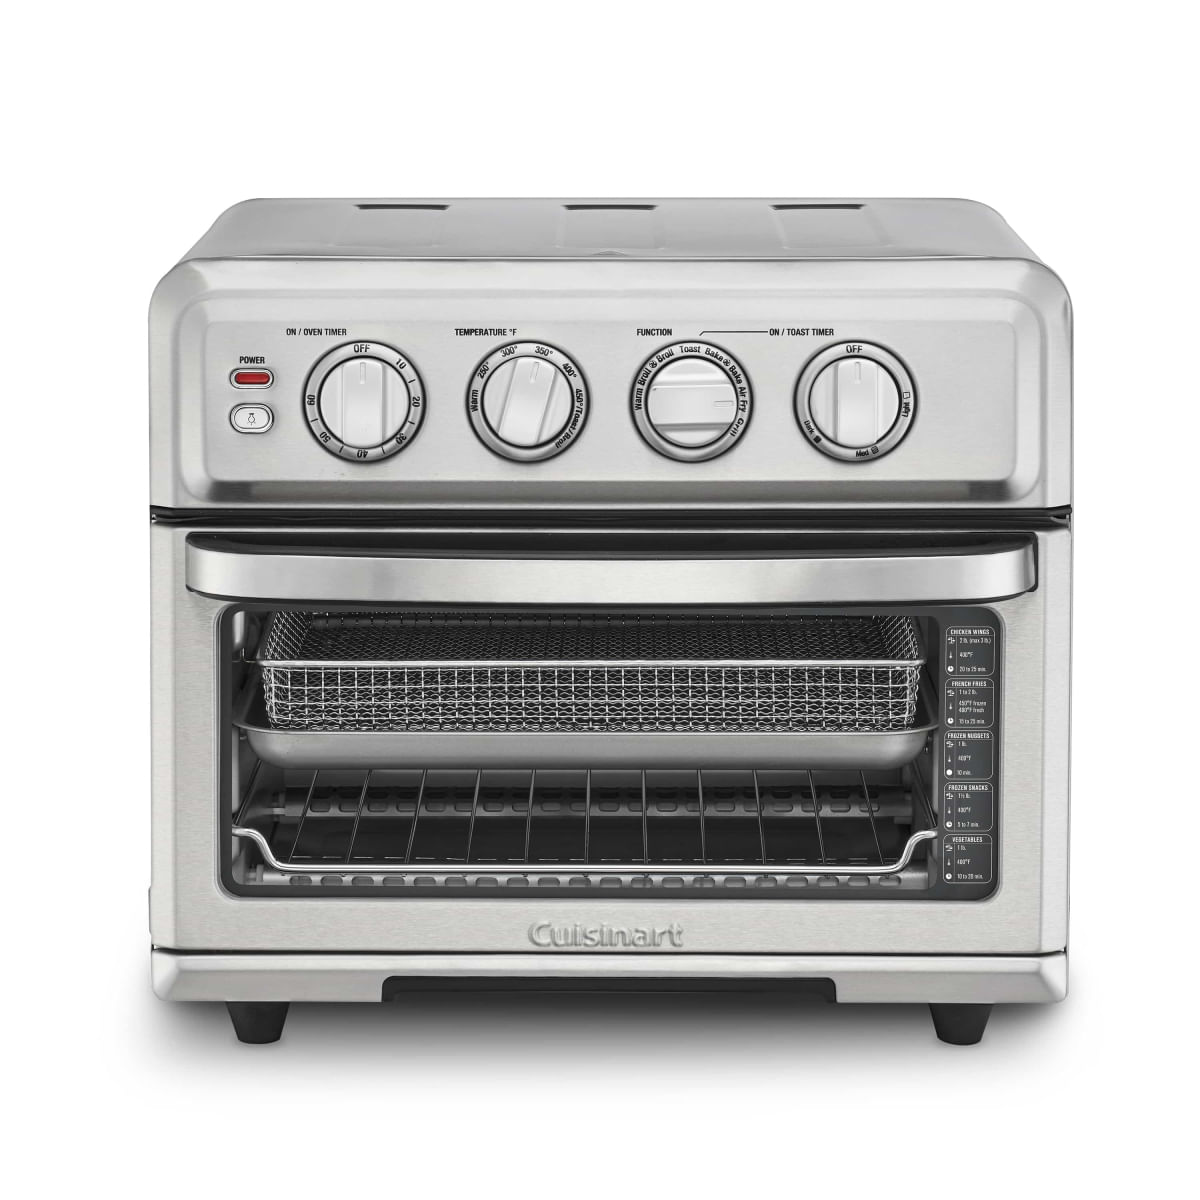 Airfryer + Forno Ovenfryer 17L Cuisinart Grill | 127V